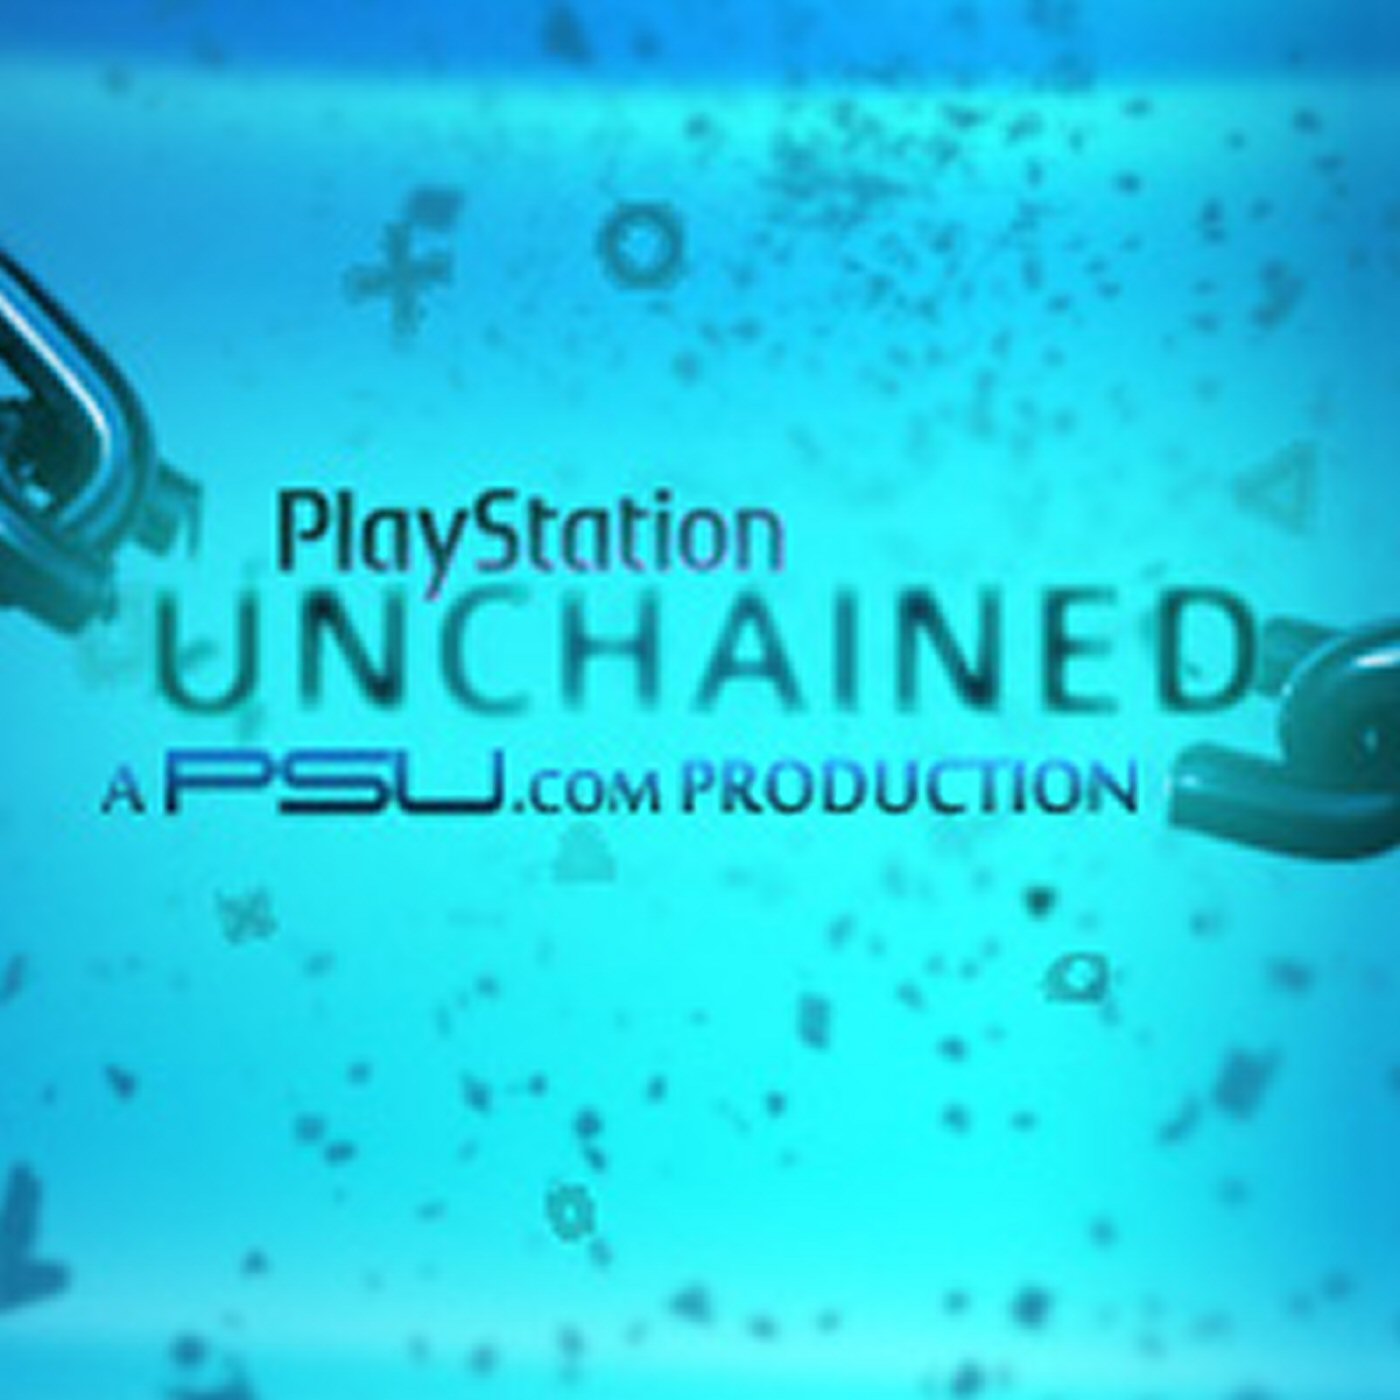 PlayStation Unchained - Episode 5 - News and gossip from the world of PlayStation